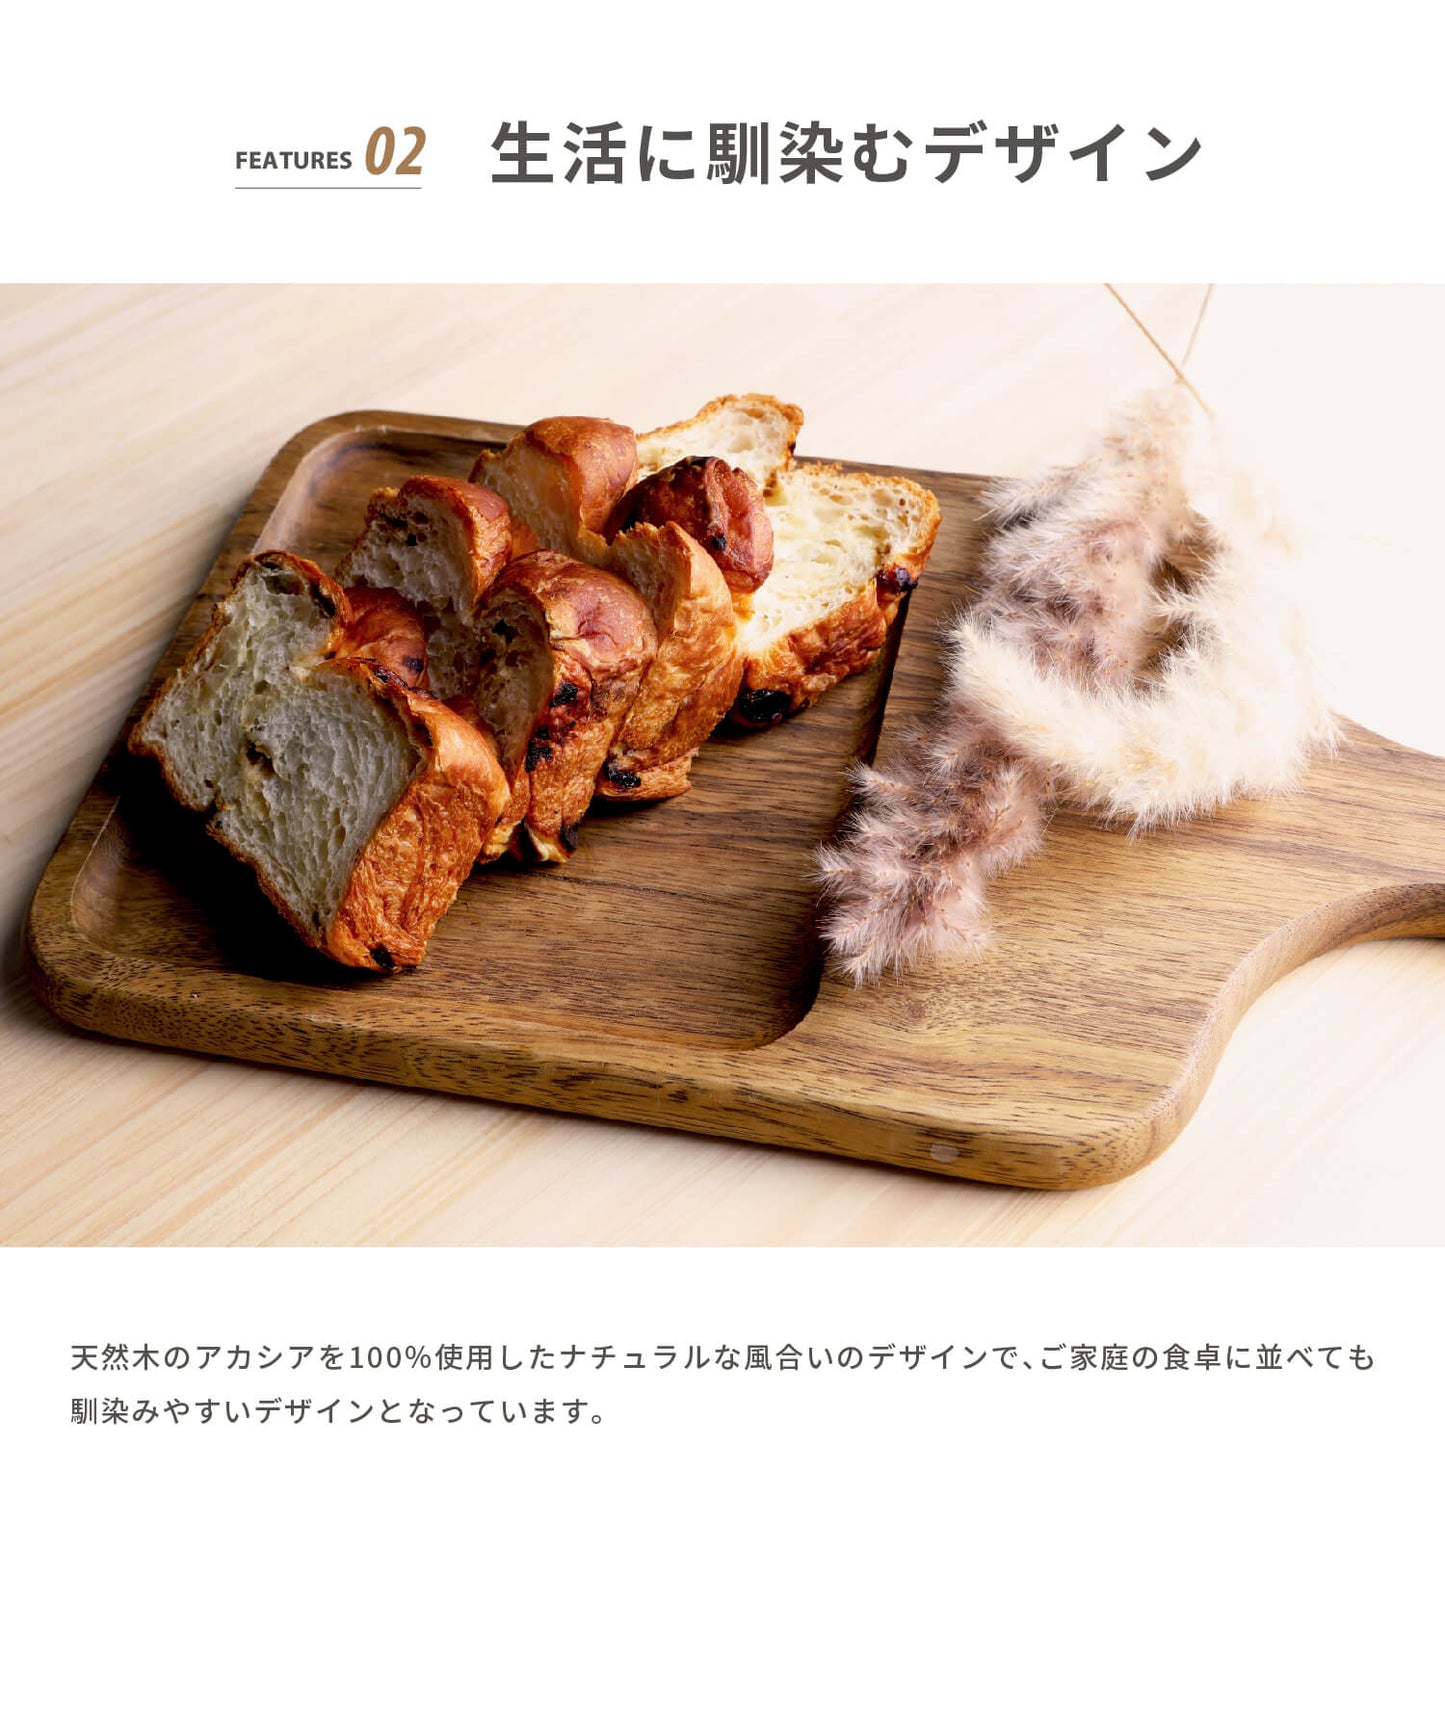 【 S'more Cutting board of s'more 】カッティングボード まな板